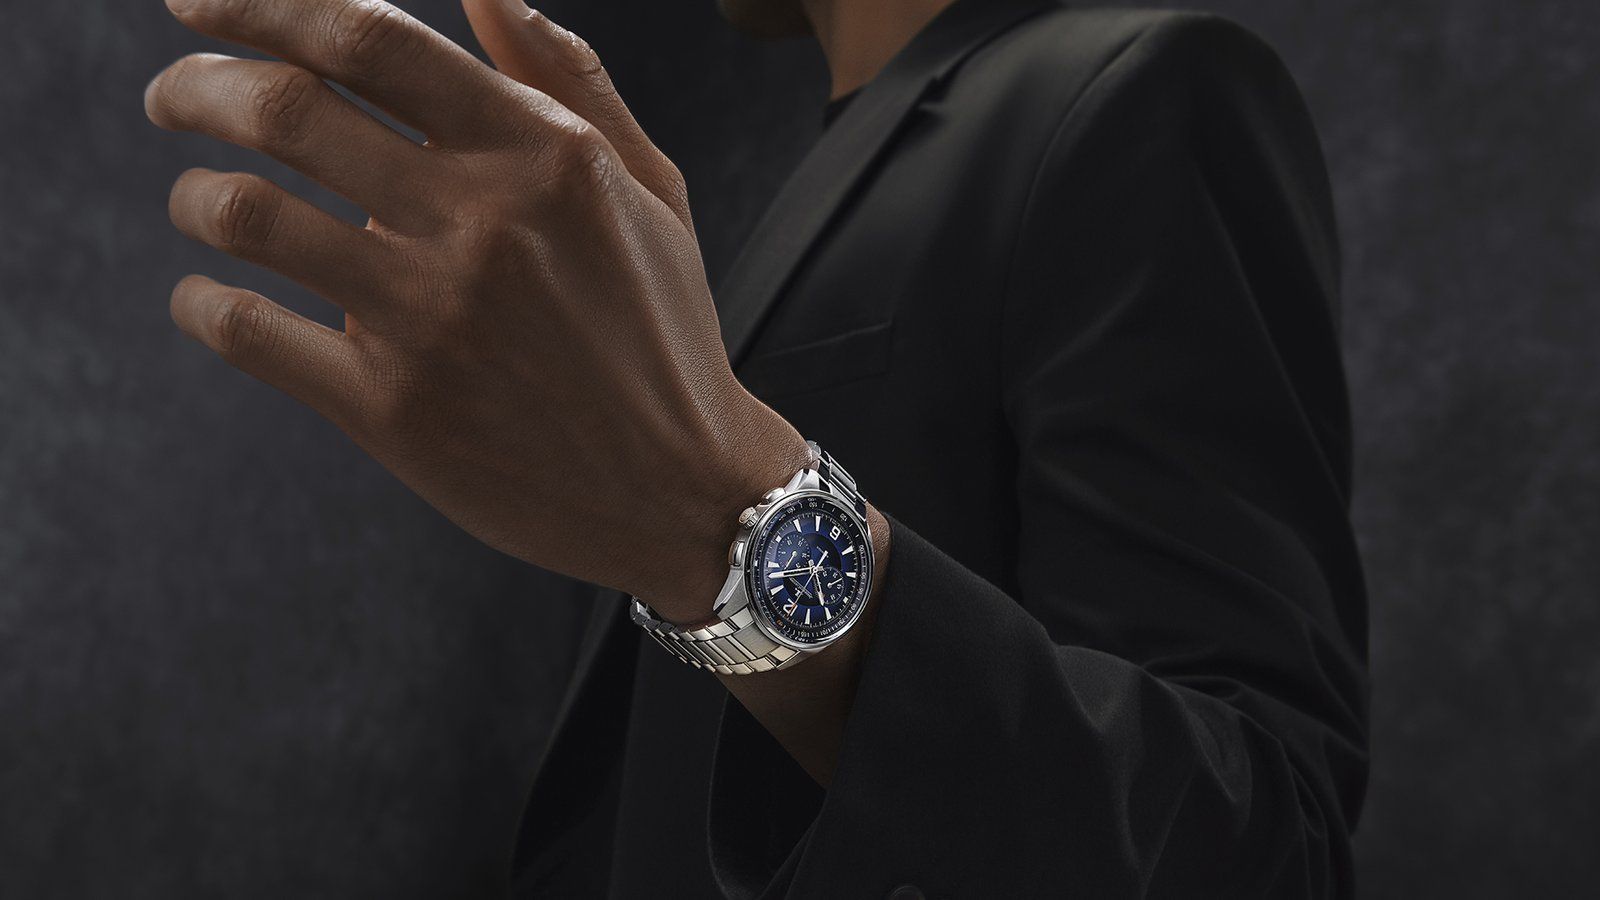 The blue dial is complemented by a steel bracelet and a blue rubber strap textured with a ‘Clous de Paris’ pattern